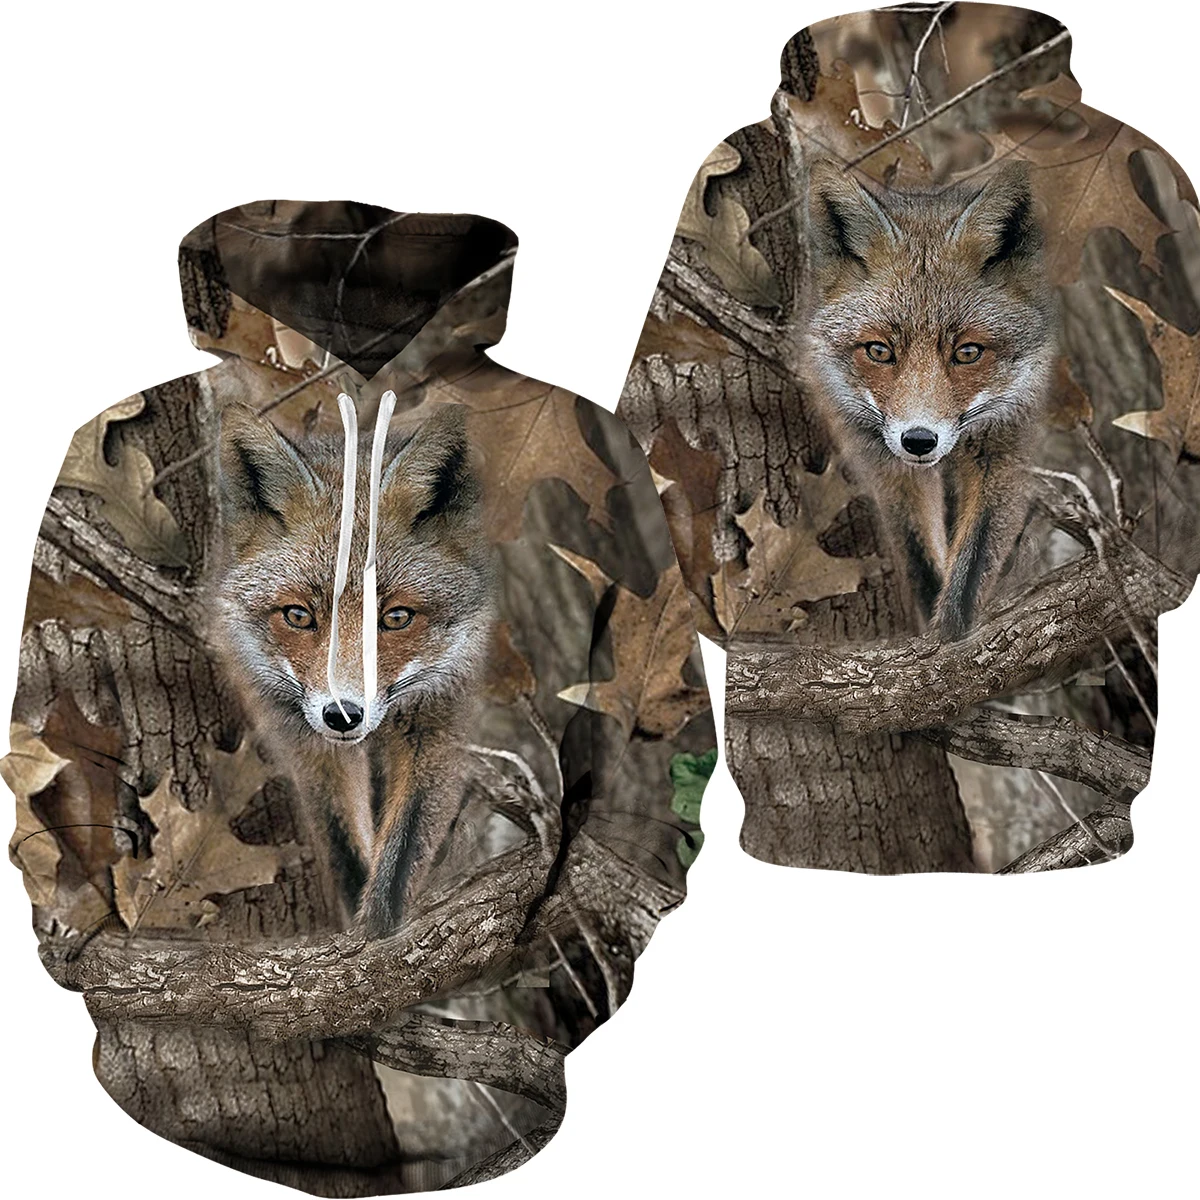 

Forest Camouflage Print Men's Hoodies Outdoor Fishing Camping Hunting Essentials Pullover Fashion 3D Animal Pattern Jackets Coat